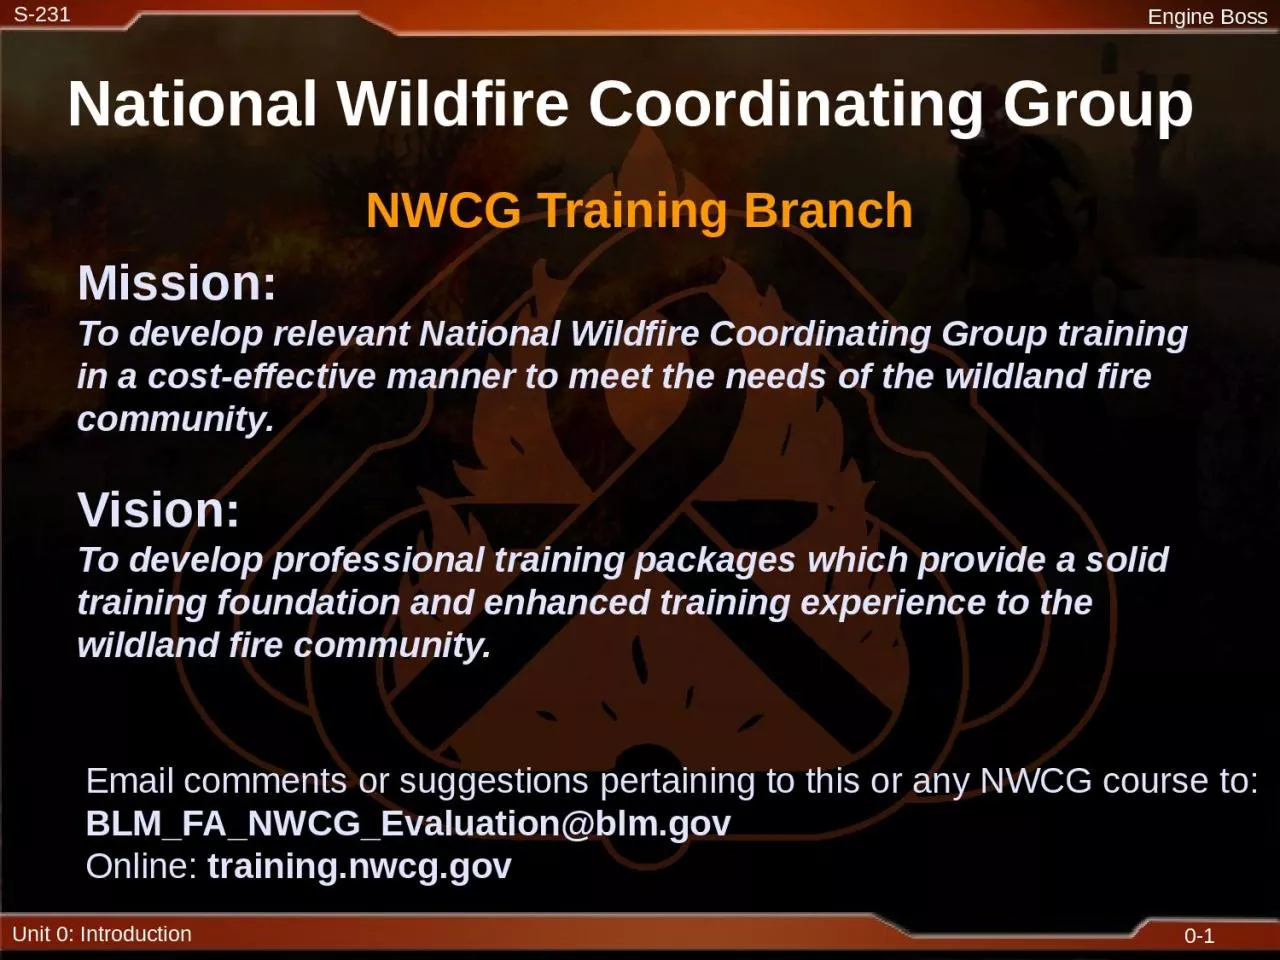 NWCG Training Branch Mission: